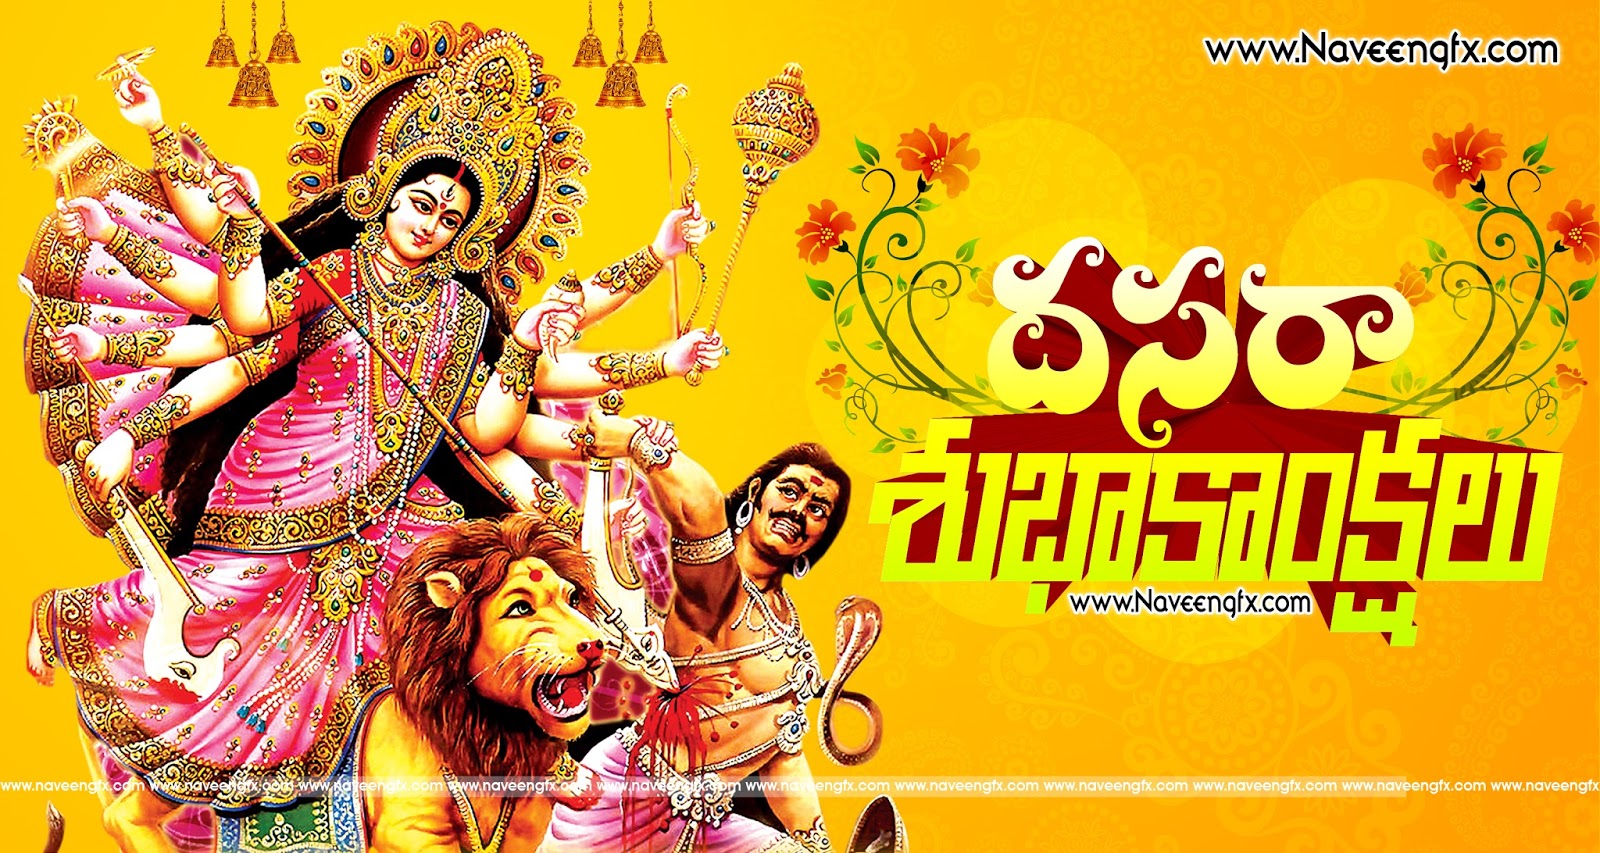 happy dussehra telugu quotes and greetings HD wallpapers | naveengfx